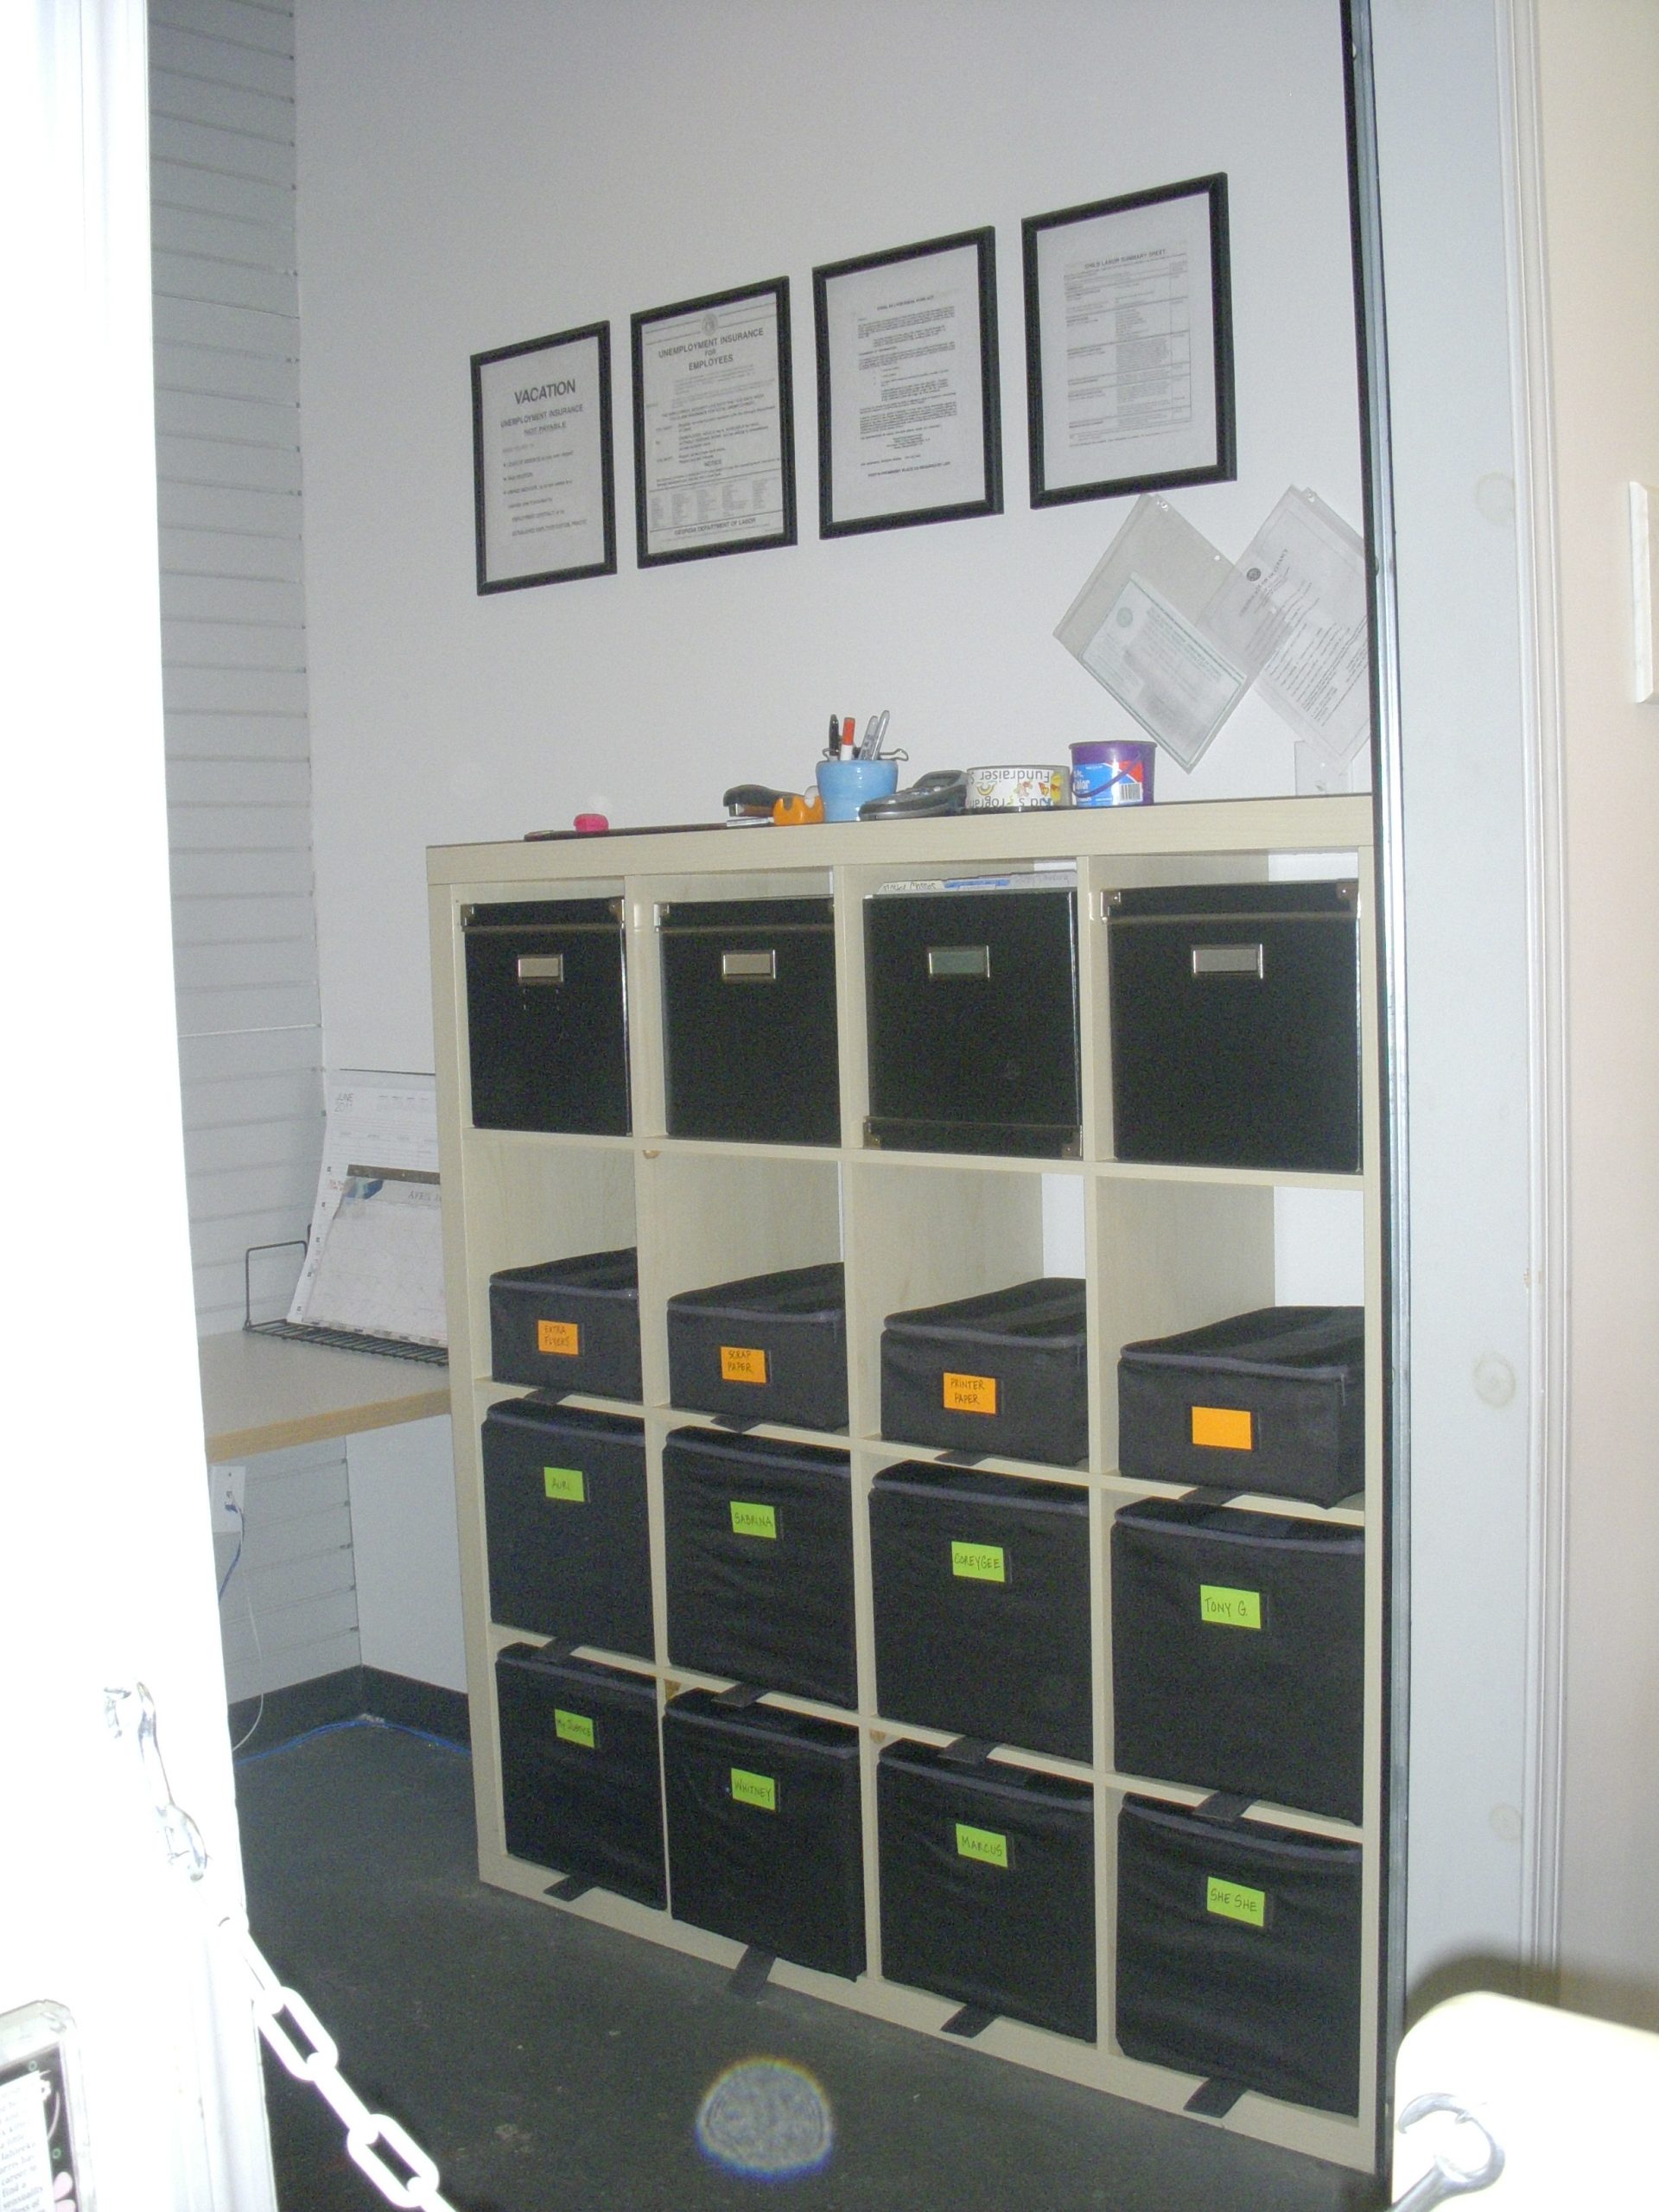 Portable Staff Lockers Make Cleaning Easy at Dance 411 Studios. - Copyright 2011 Equilibria, Inc.